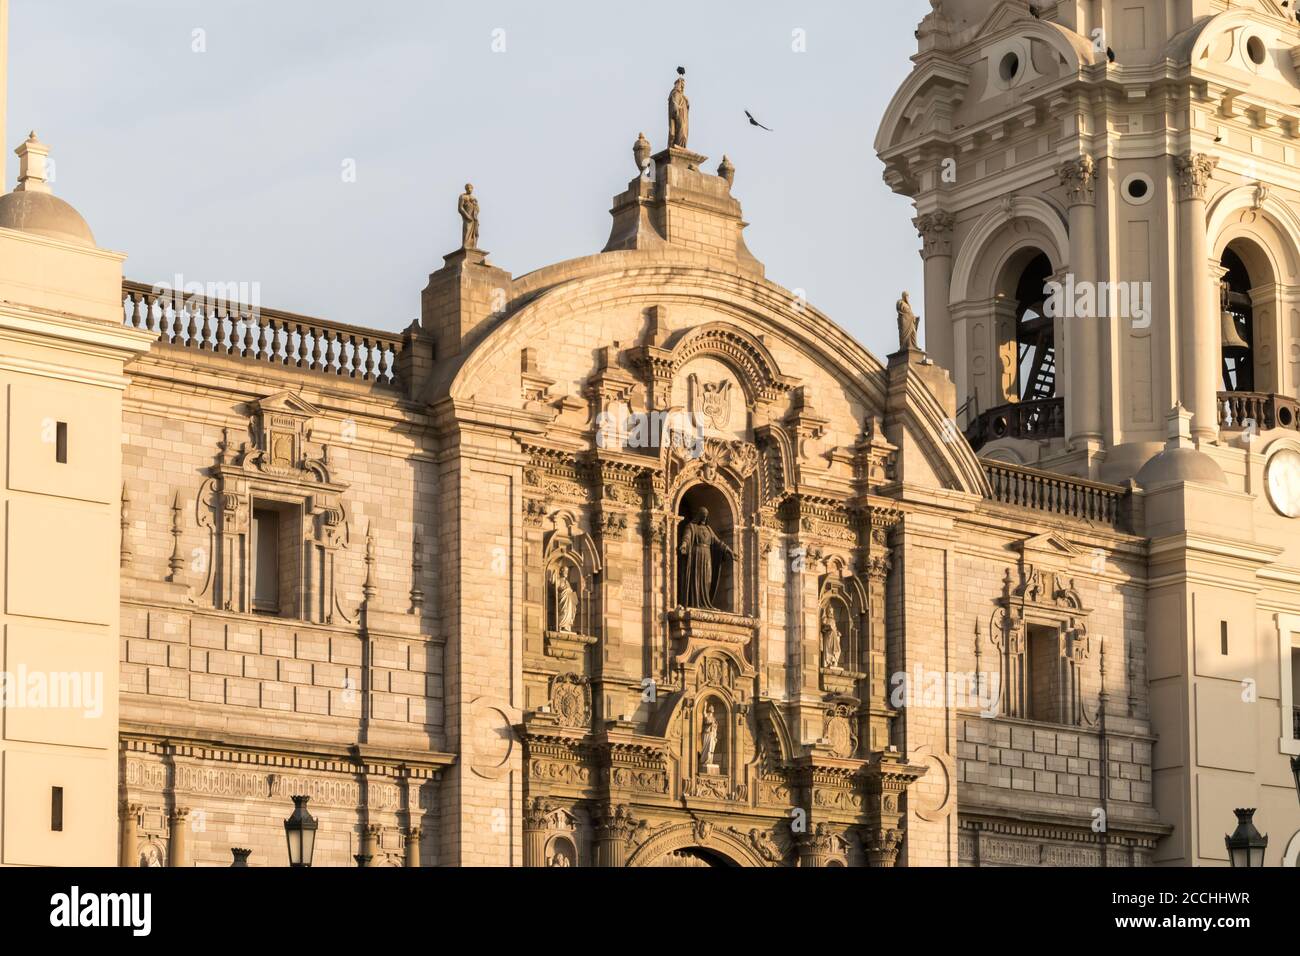 View of the historical central square of Lima, Peru Stock Photo